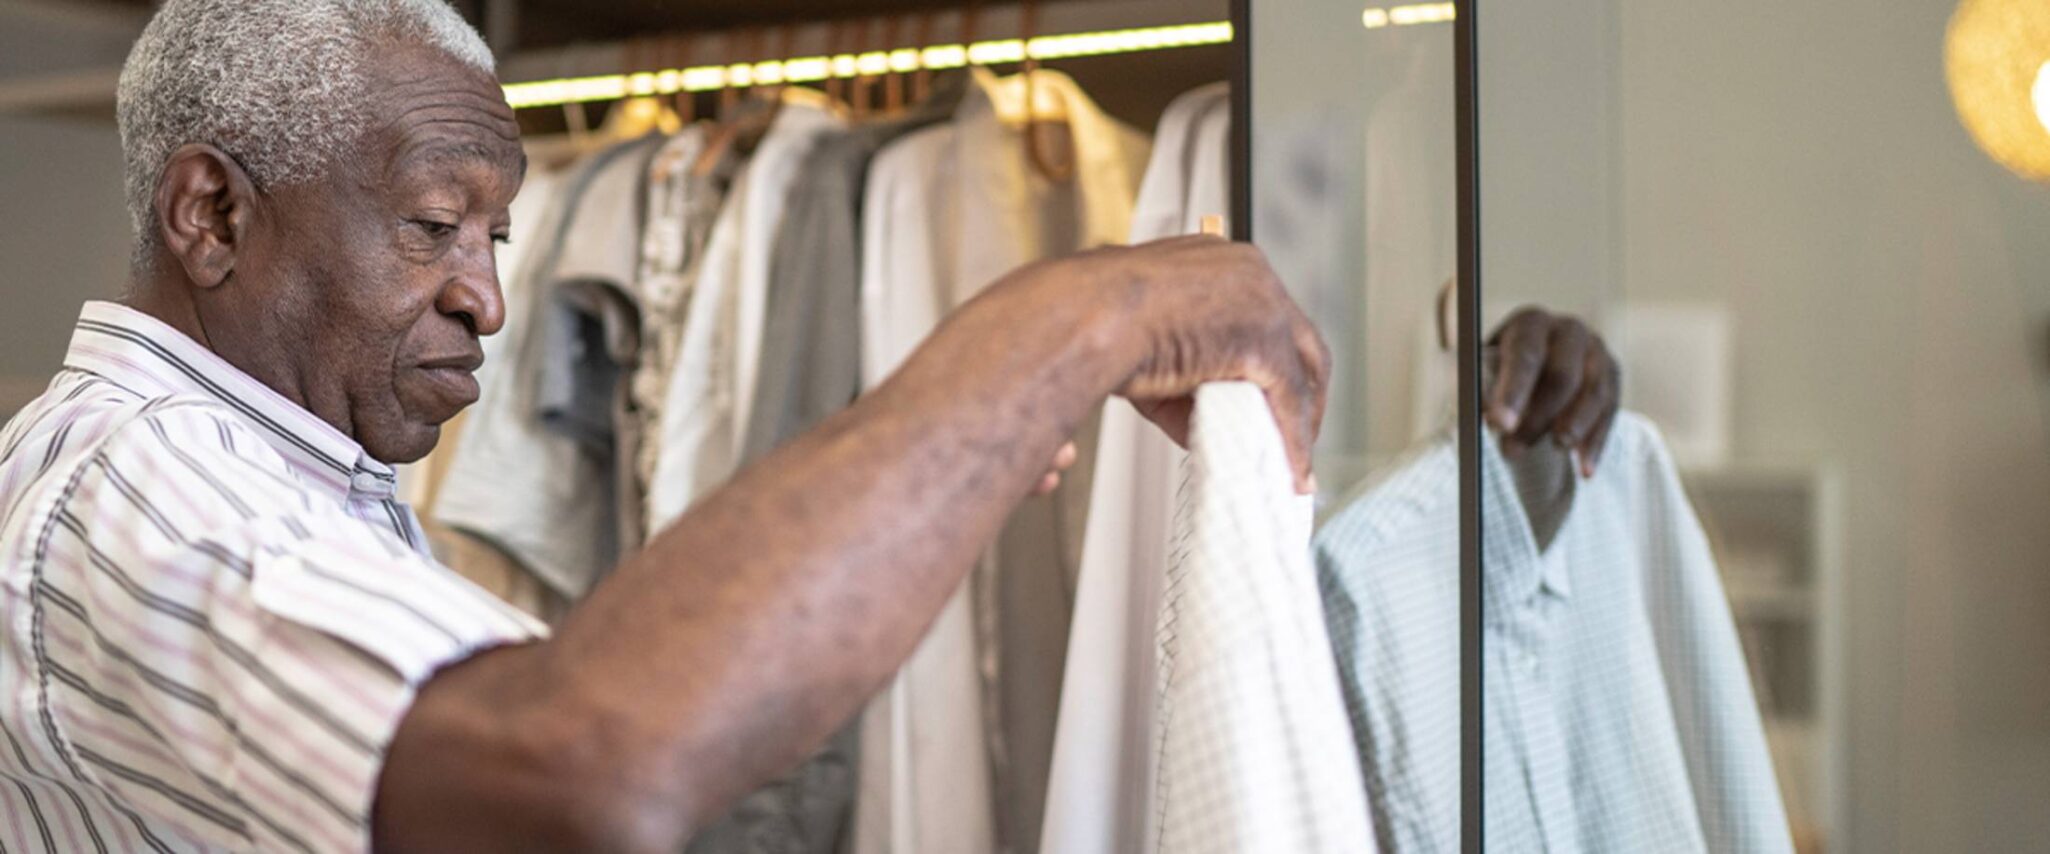 A senior man looks at clothes hanging in the closet